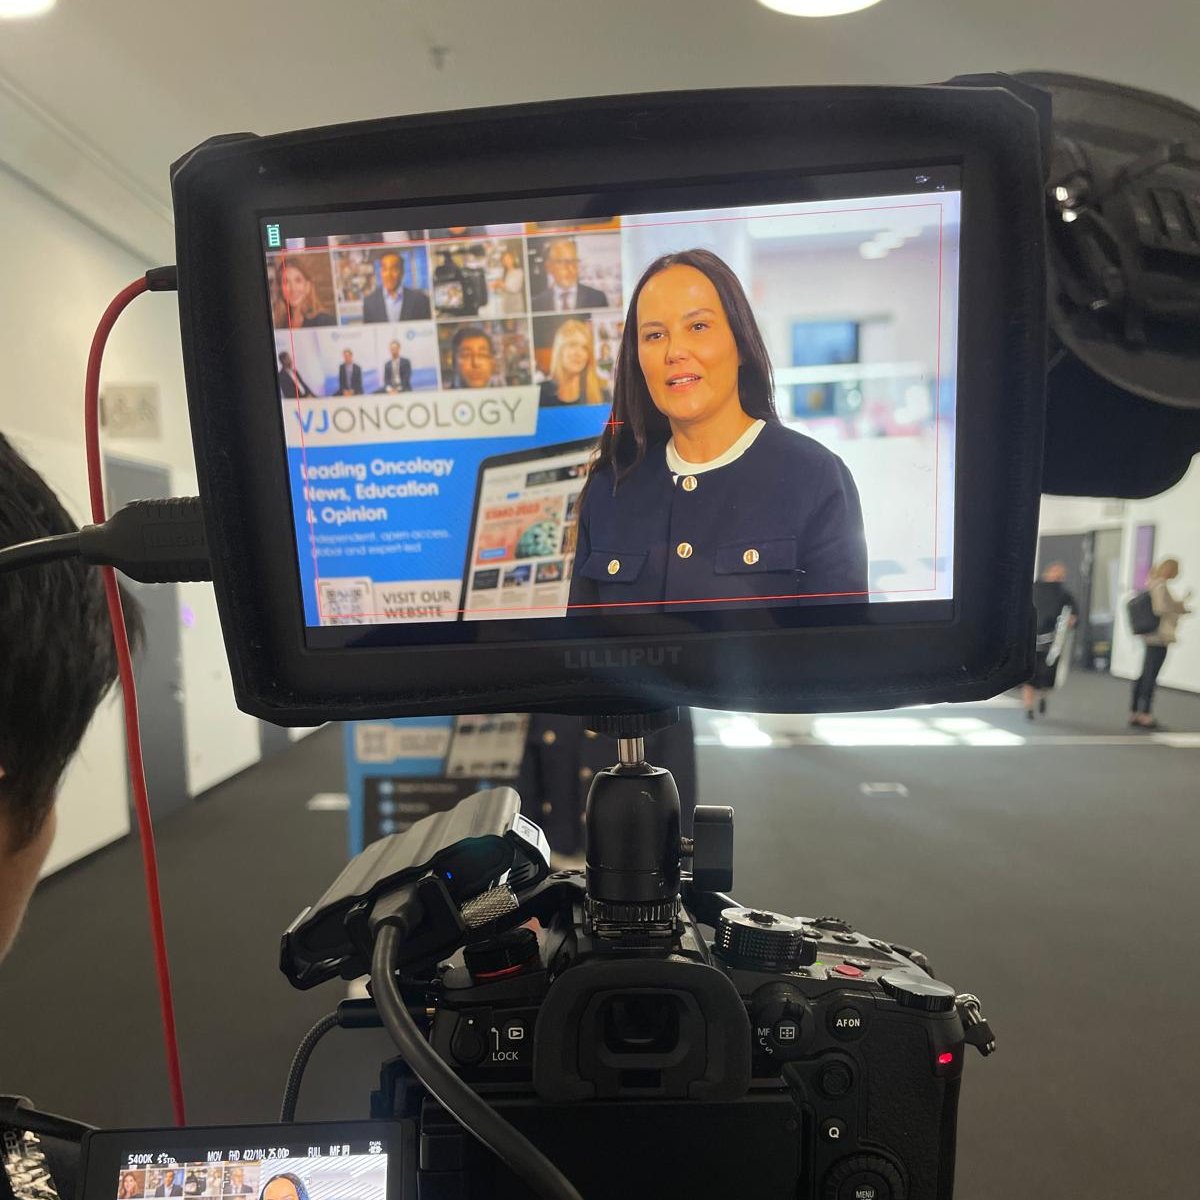 #ESMOBreast24 | We had the pleasure to speak to @FioriPoulakaki, who discusses QoL issues after axillary treatment in #breastcancer. Watch out for her interview and our latest podcast episode on our congress highlights at VJOncology.com🎙️ @myESMO #bcsm @Oncoalert